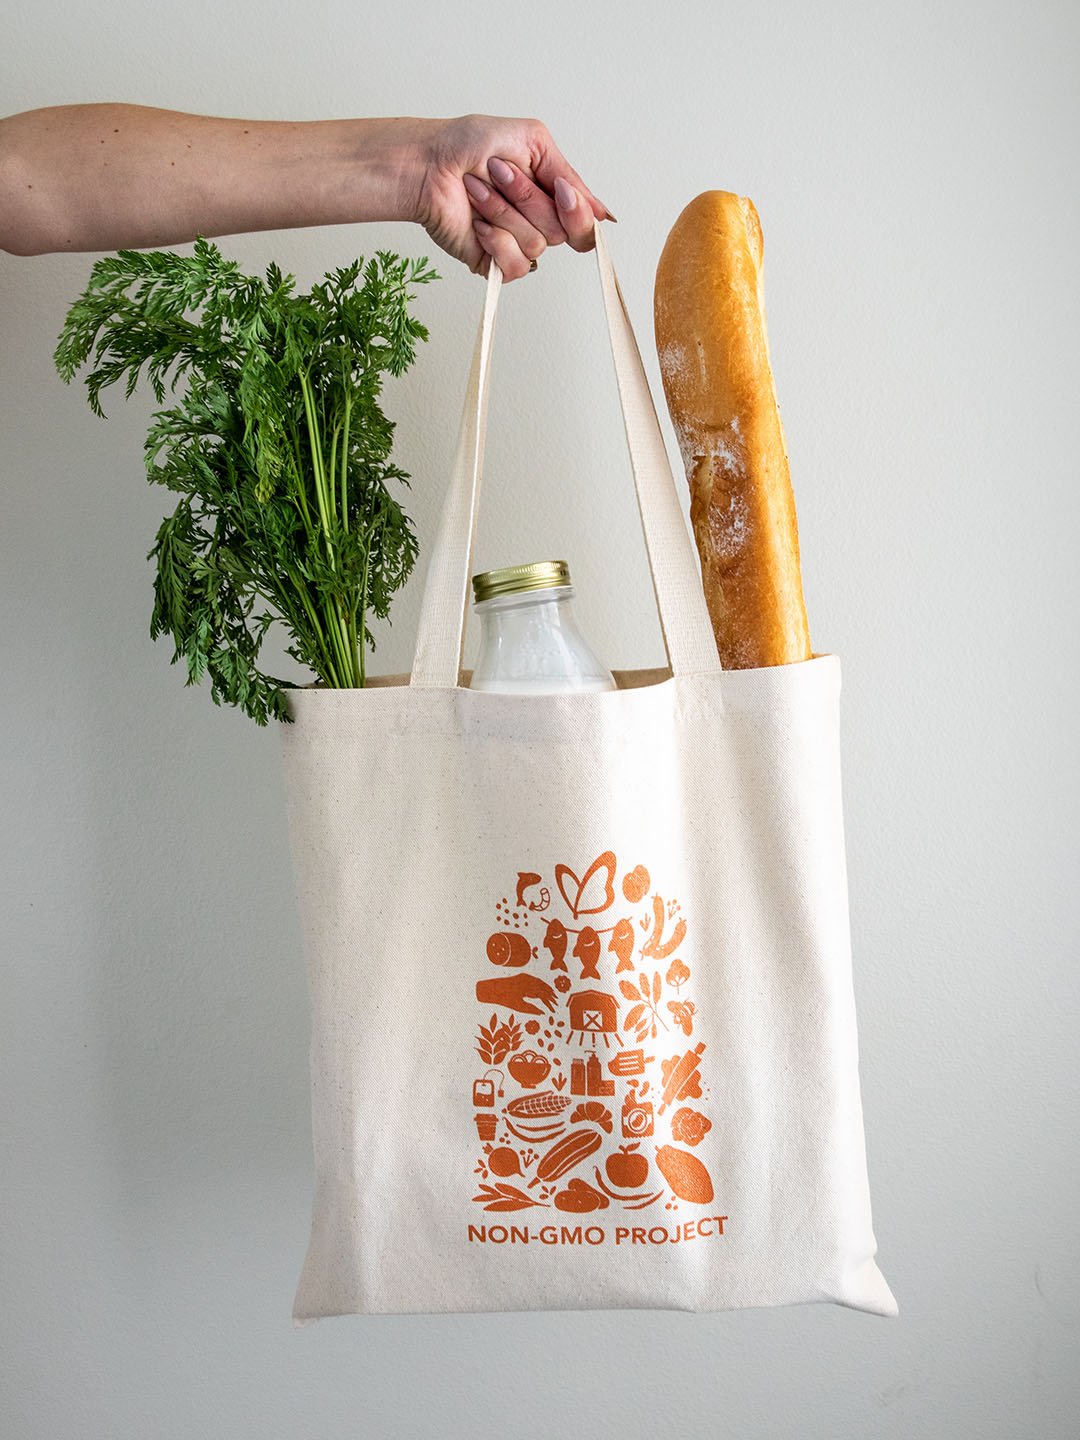 A Non-GMO Project canvas tote holding groceries